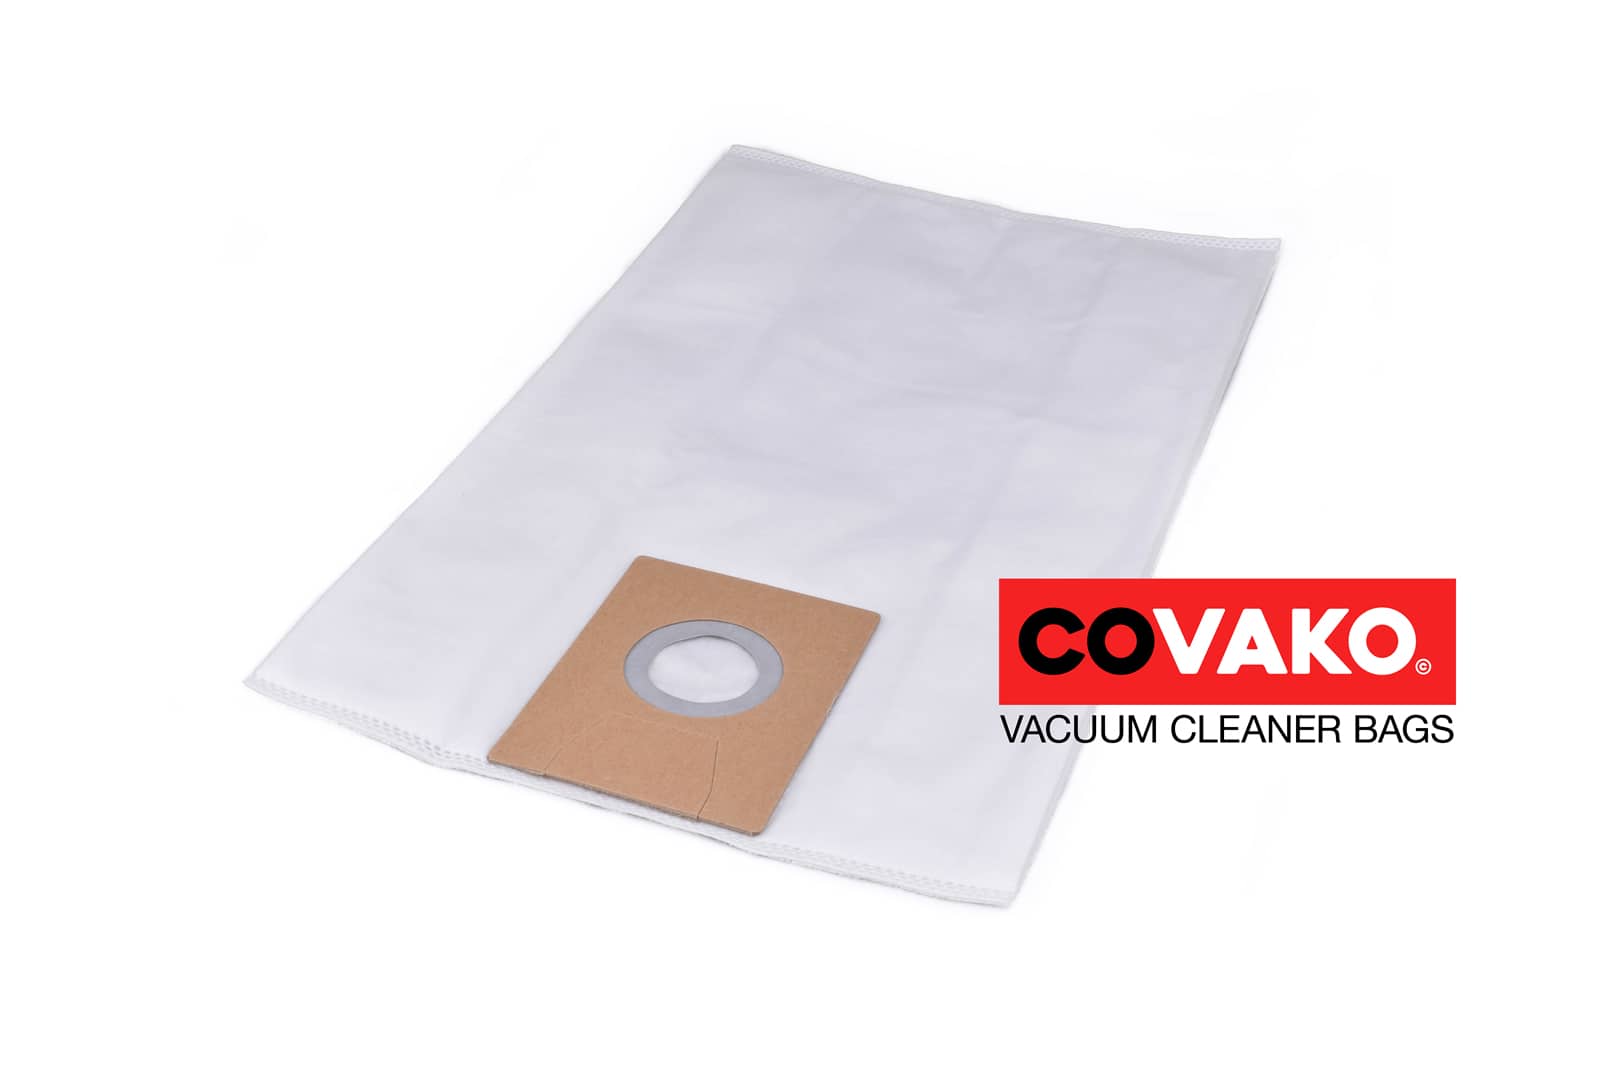 Nilco GS 1725 / Synthesis - Nilco vacuum cleaner bags